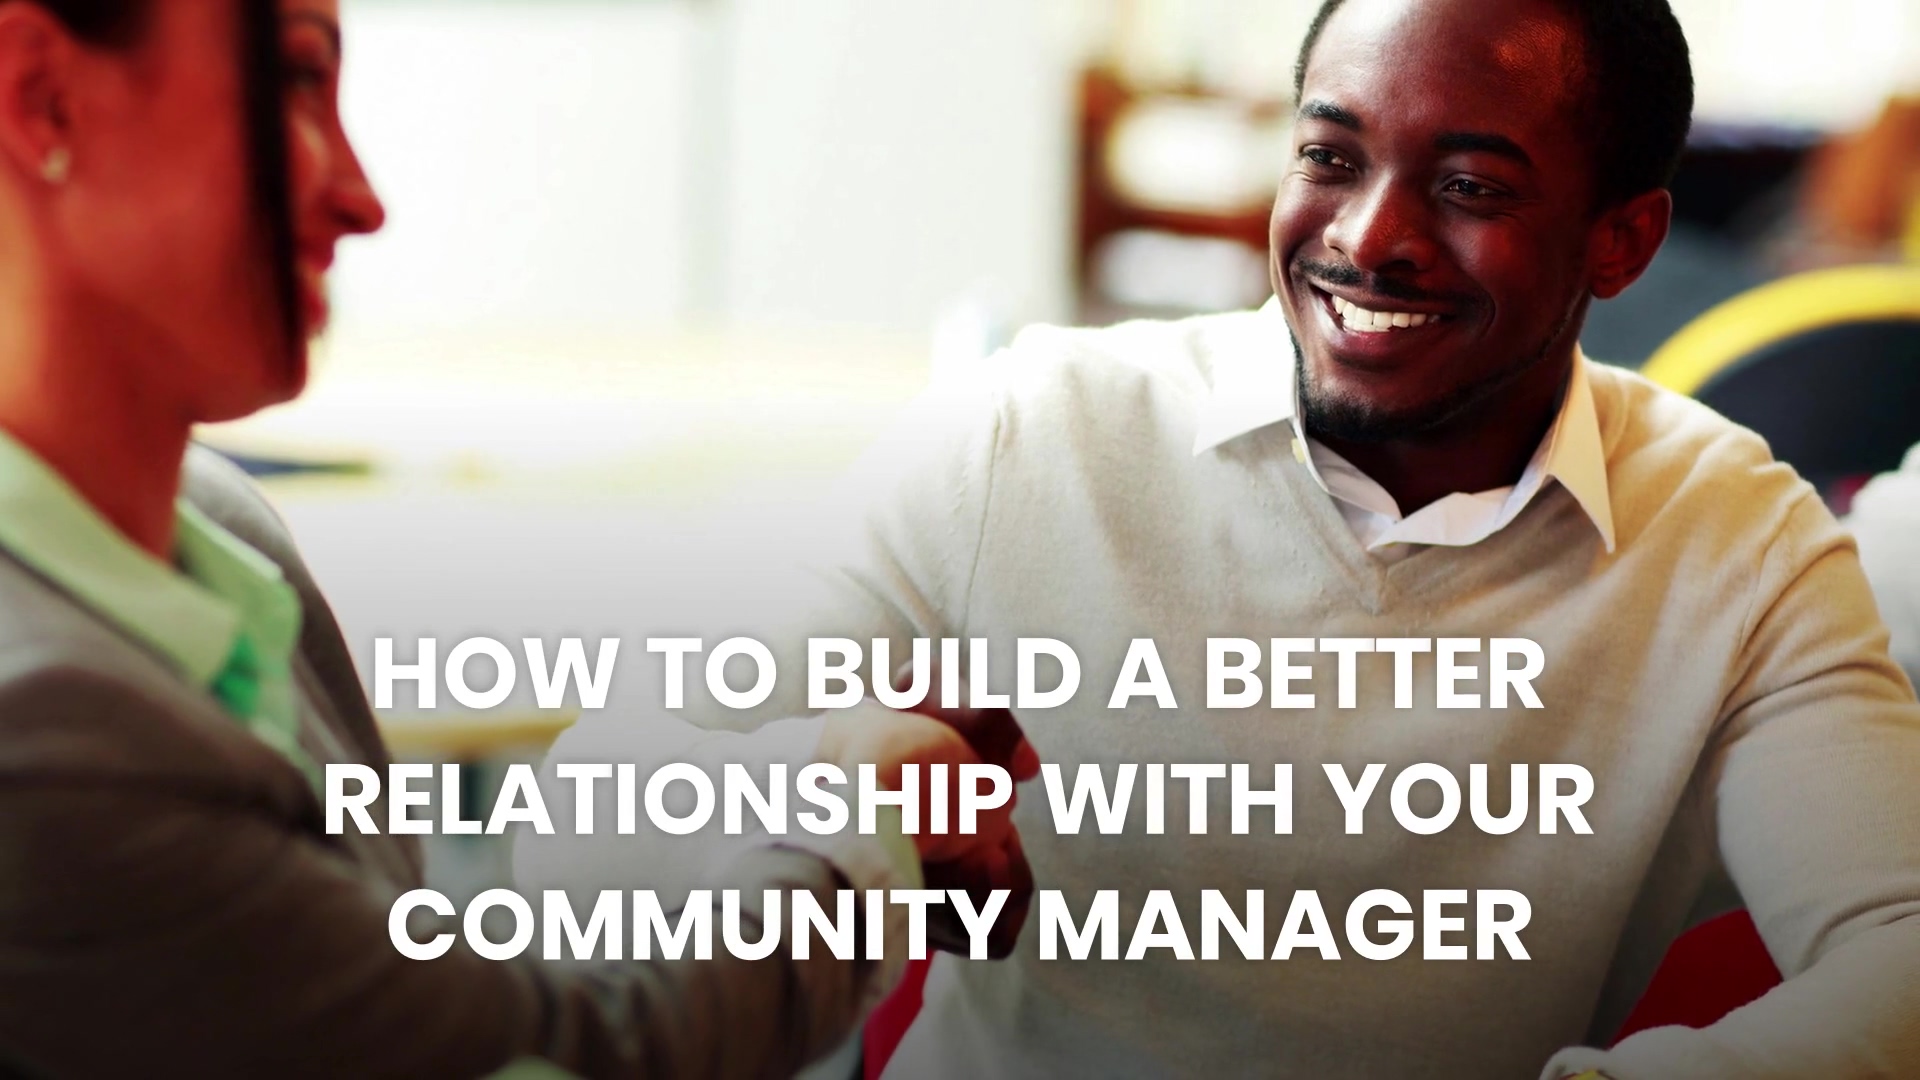 realmanage_-_how_to_build_a_better_relationship_with_your_community_manager_.mp4 (1080p)